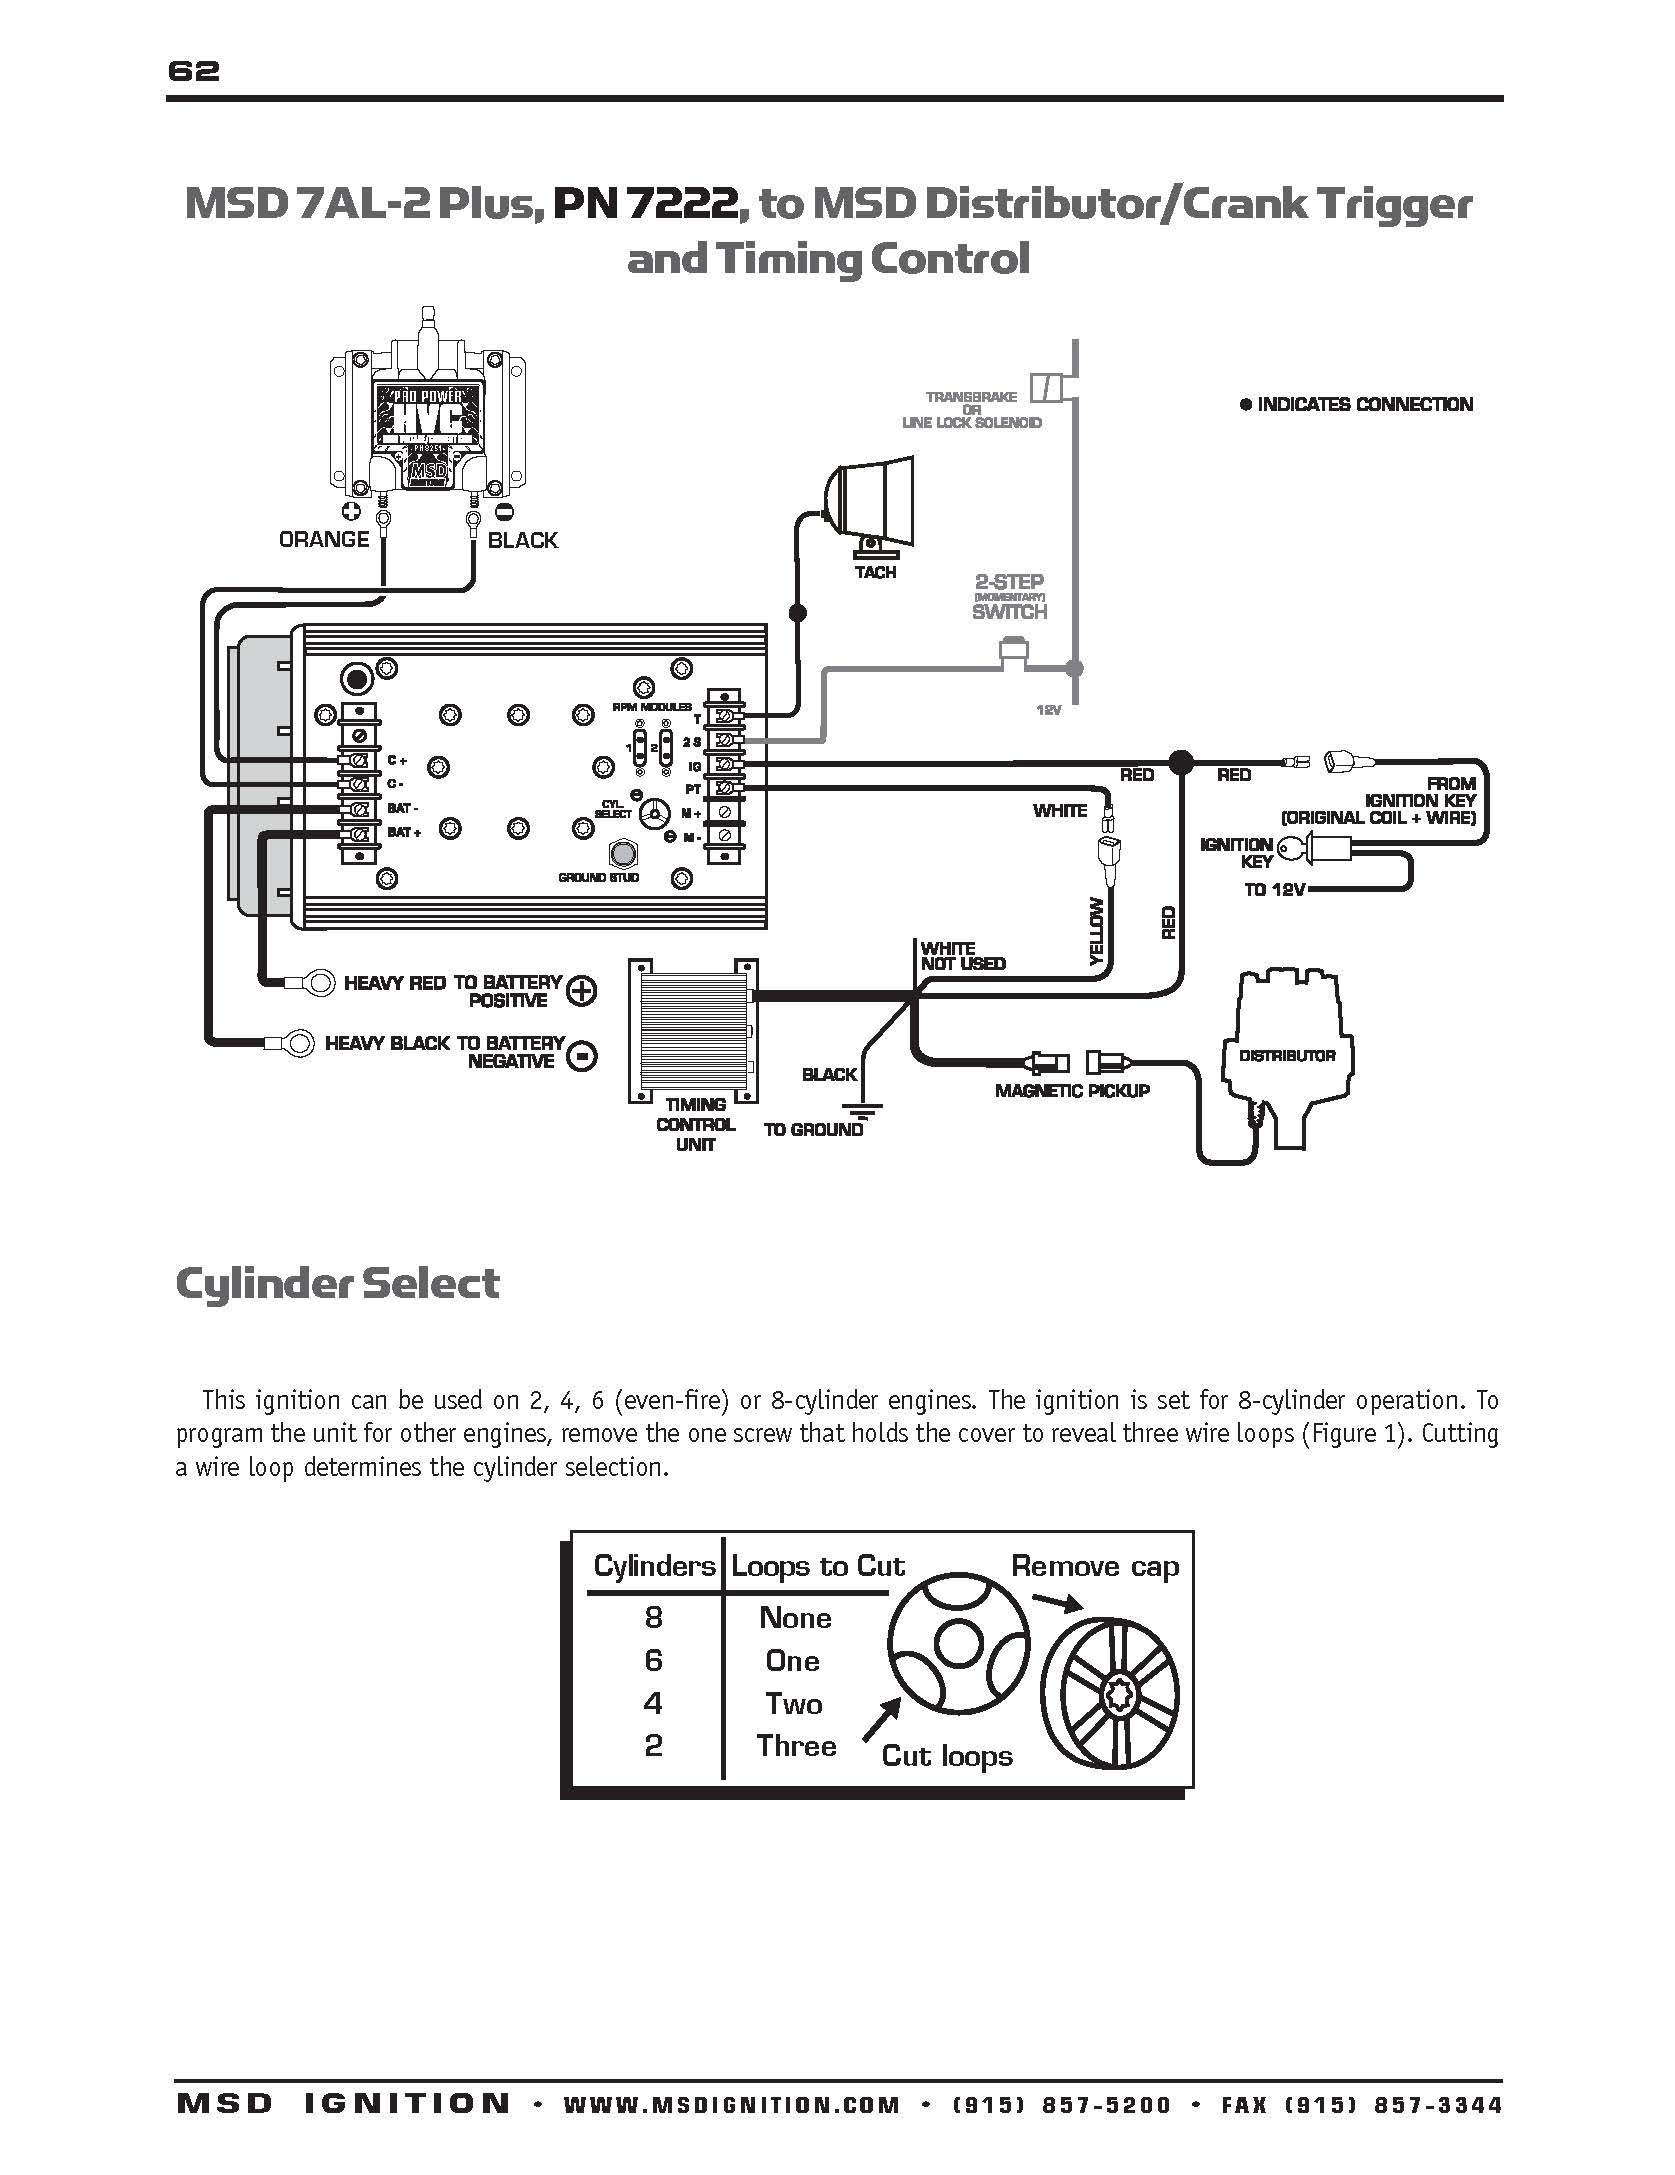 Mallory Wiring Diagram 351 | Wiring Diagram - Mallory Ignition Wiring Diagram